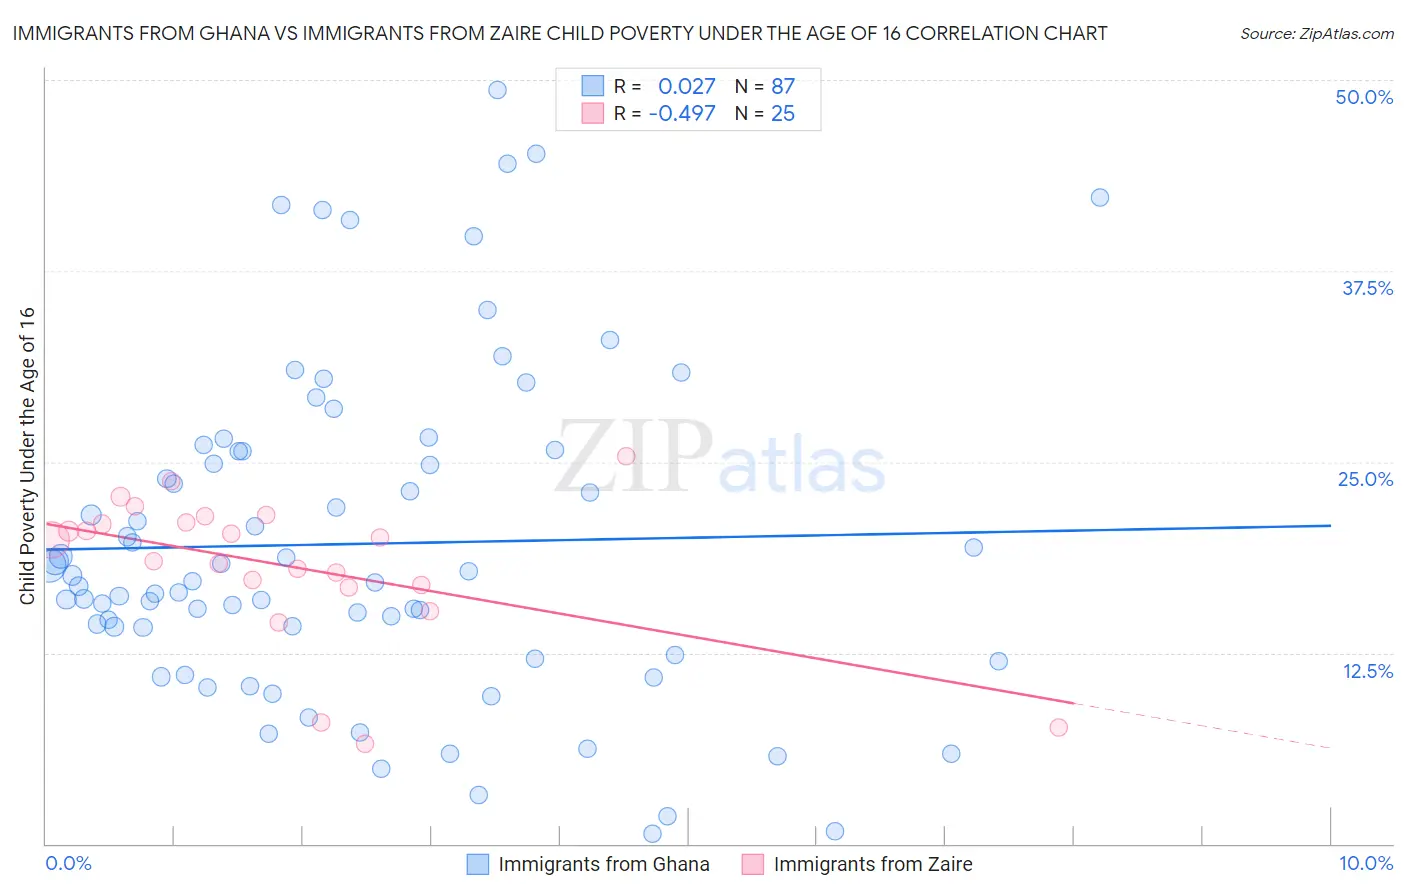 Immigrants from Ghana vs Immigrants from Zaire Child Poverty Under the Age of 16